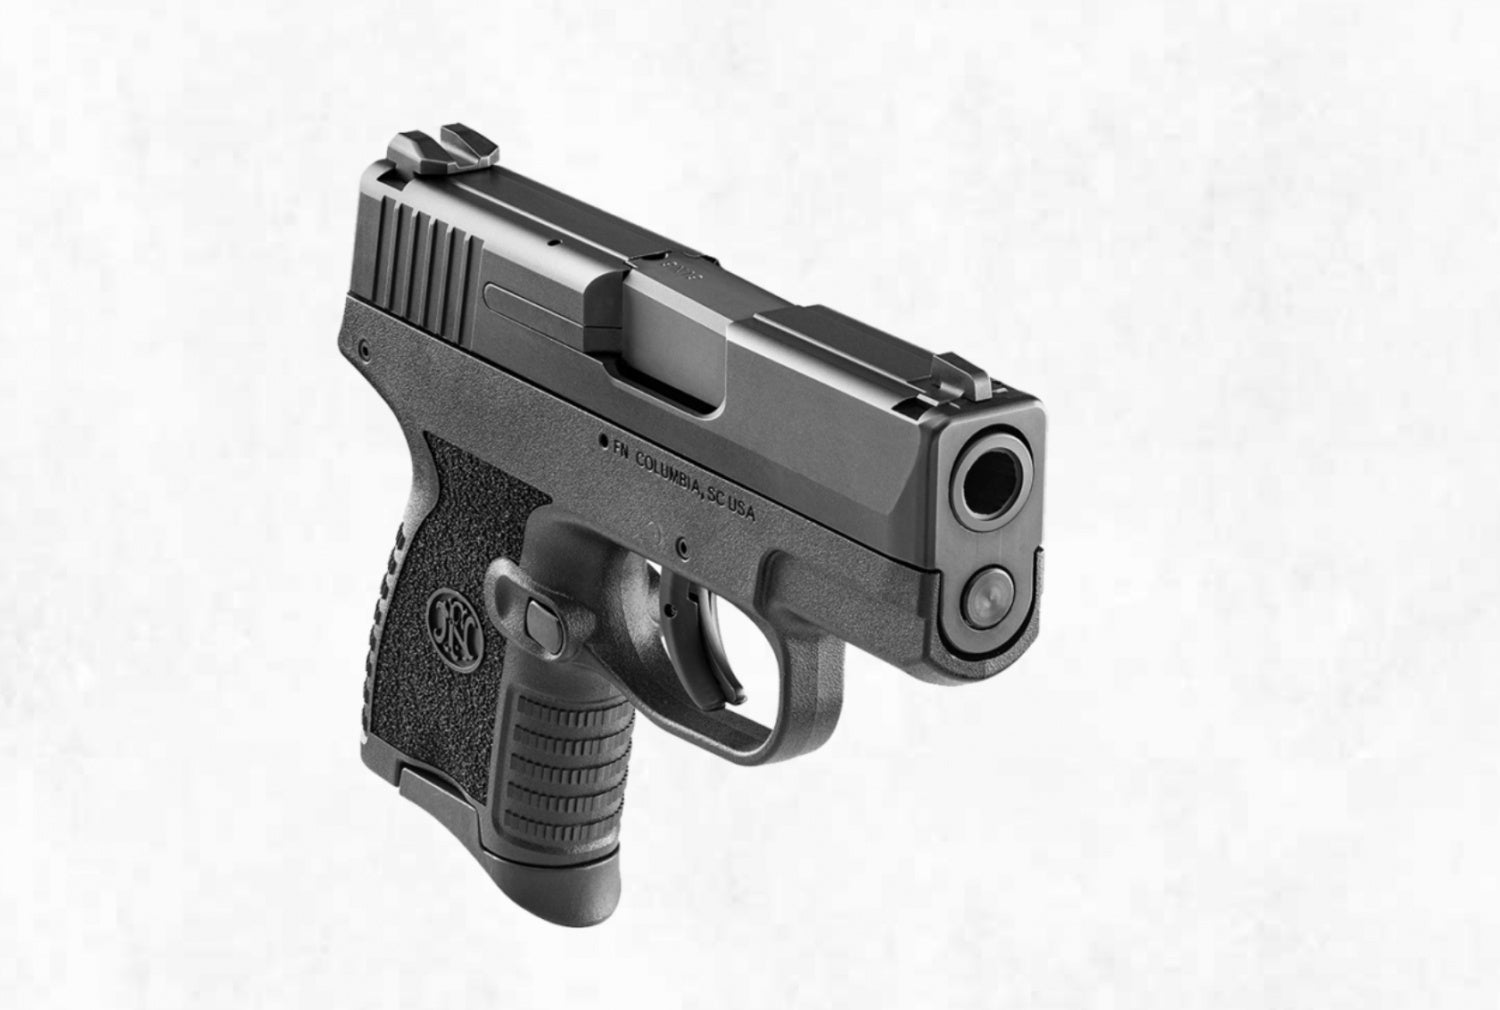 NEW RELEASE: The FN 503 Slim Pistol - Just in Time For Beach Season